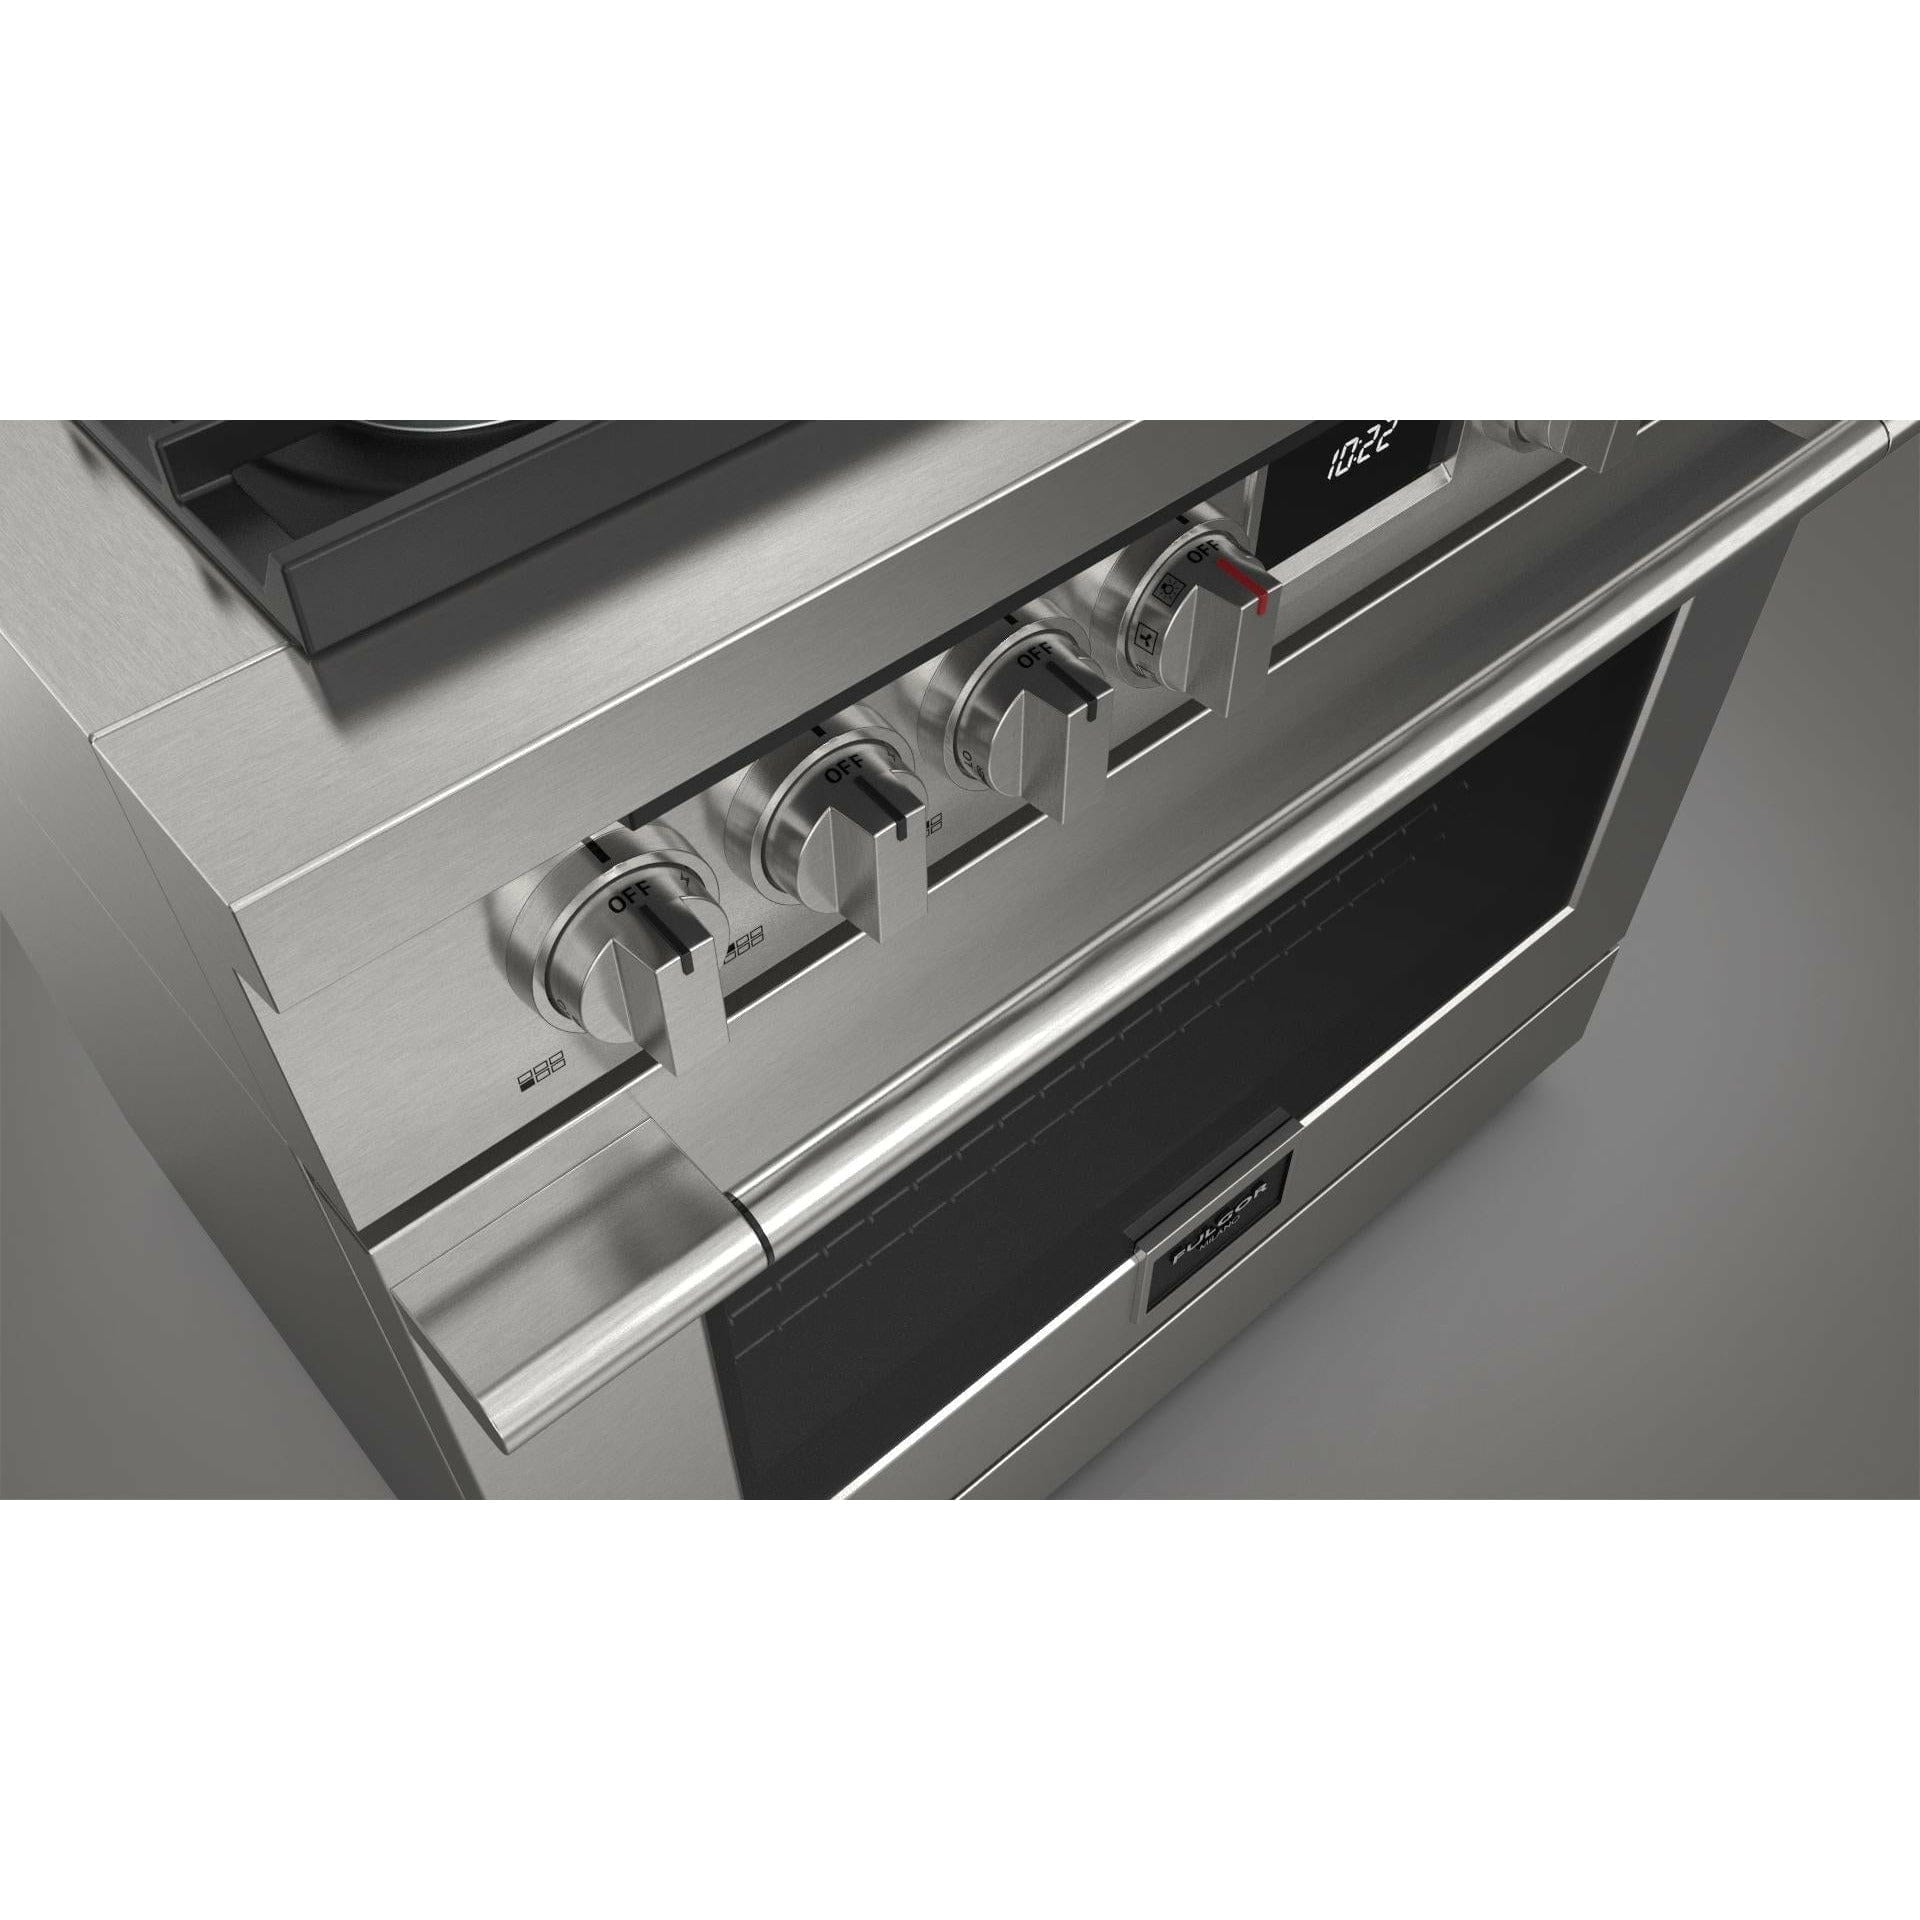 Fulgor Milano 36" Pro-Style Dual Fuel Range with 5.7 Cu. Ft. Capacity, Stainless Steel - F4PDF366S1 Ranges Luxury Appliances Direct